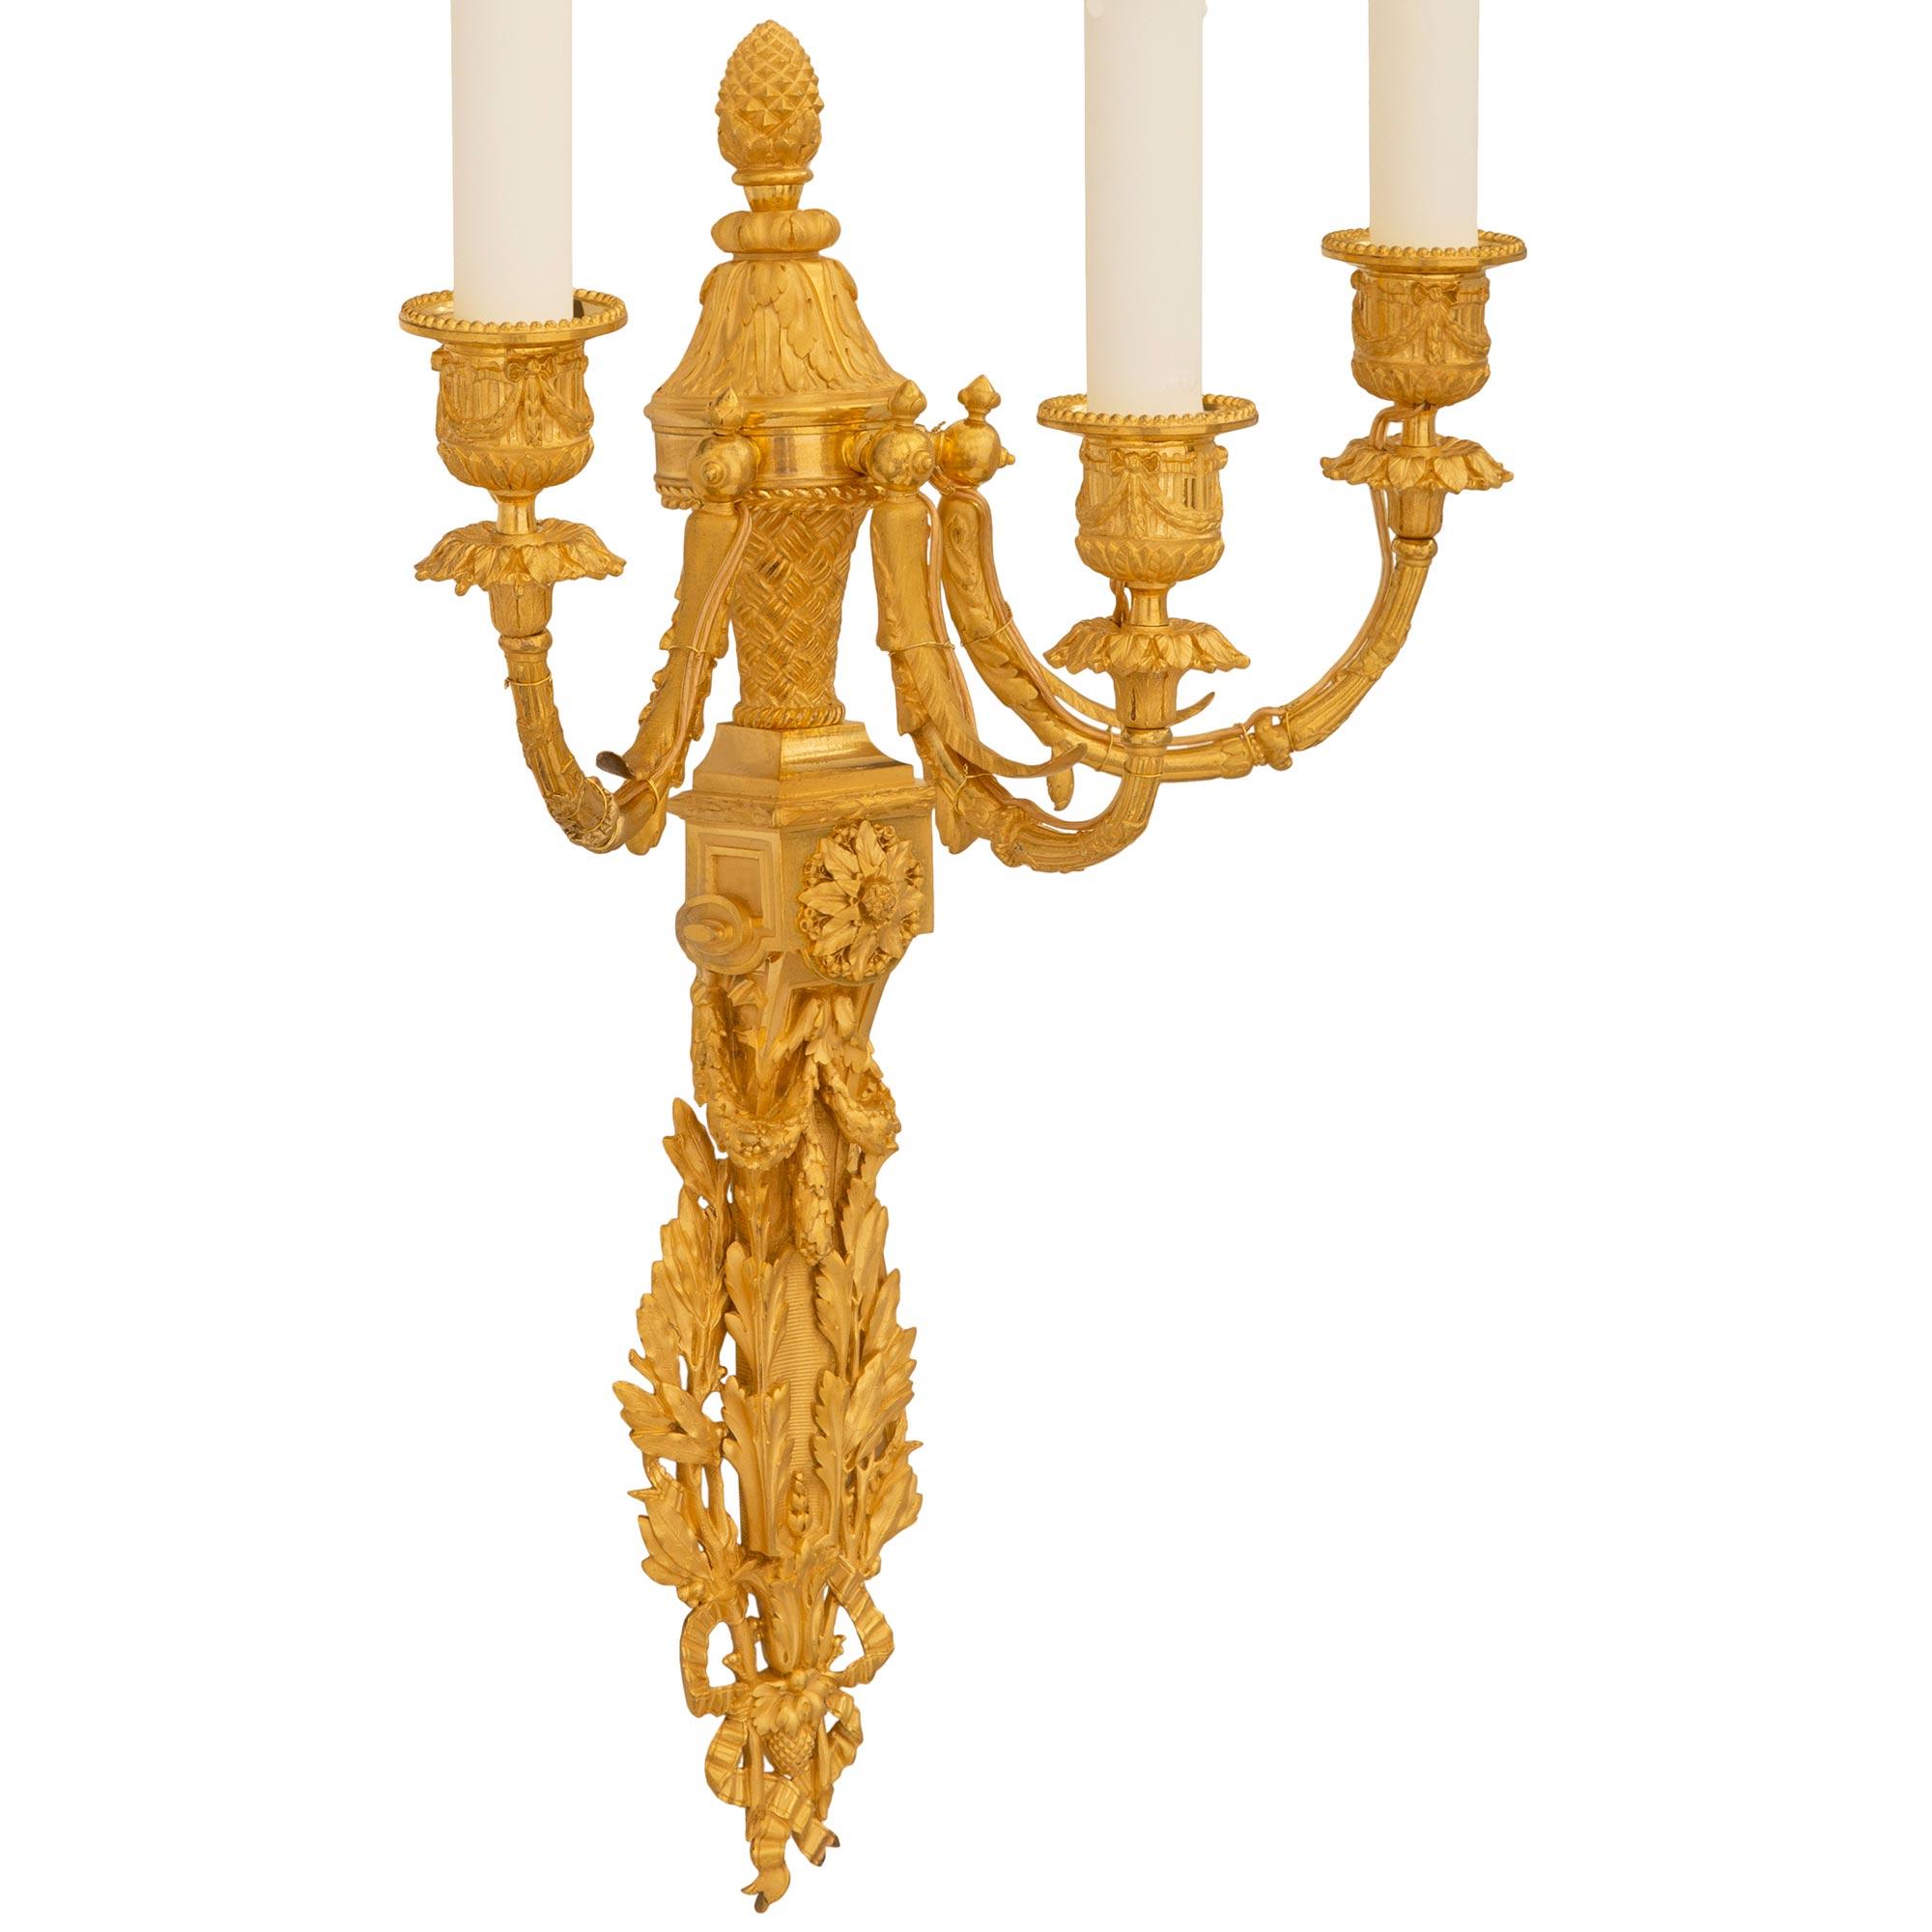 A striking and high quality pair of French 19th century Louis XVI st. Ormolu sconces. Each three arm sconce is centered by a lower backplate with a reeded design flanked by large scale laurel branches tied with a ribbon. Above is a stunning reserve